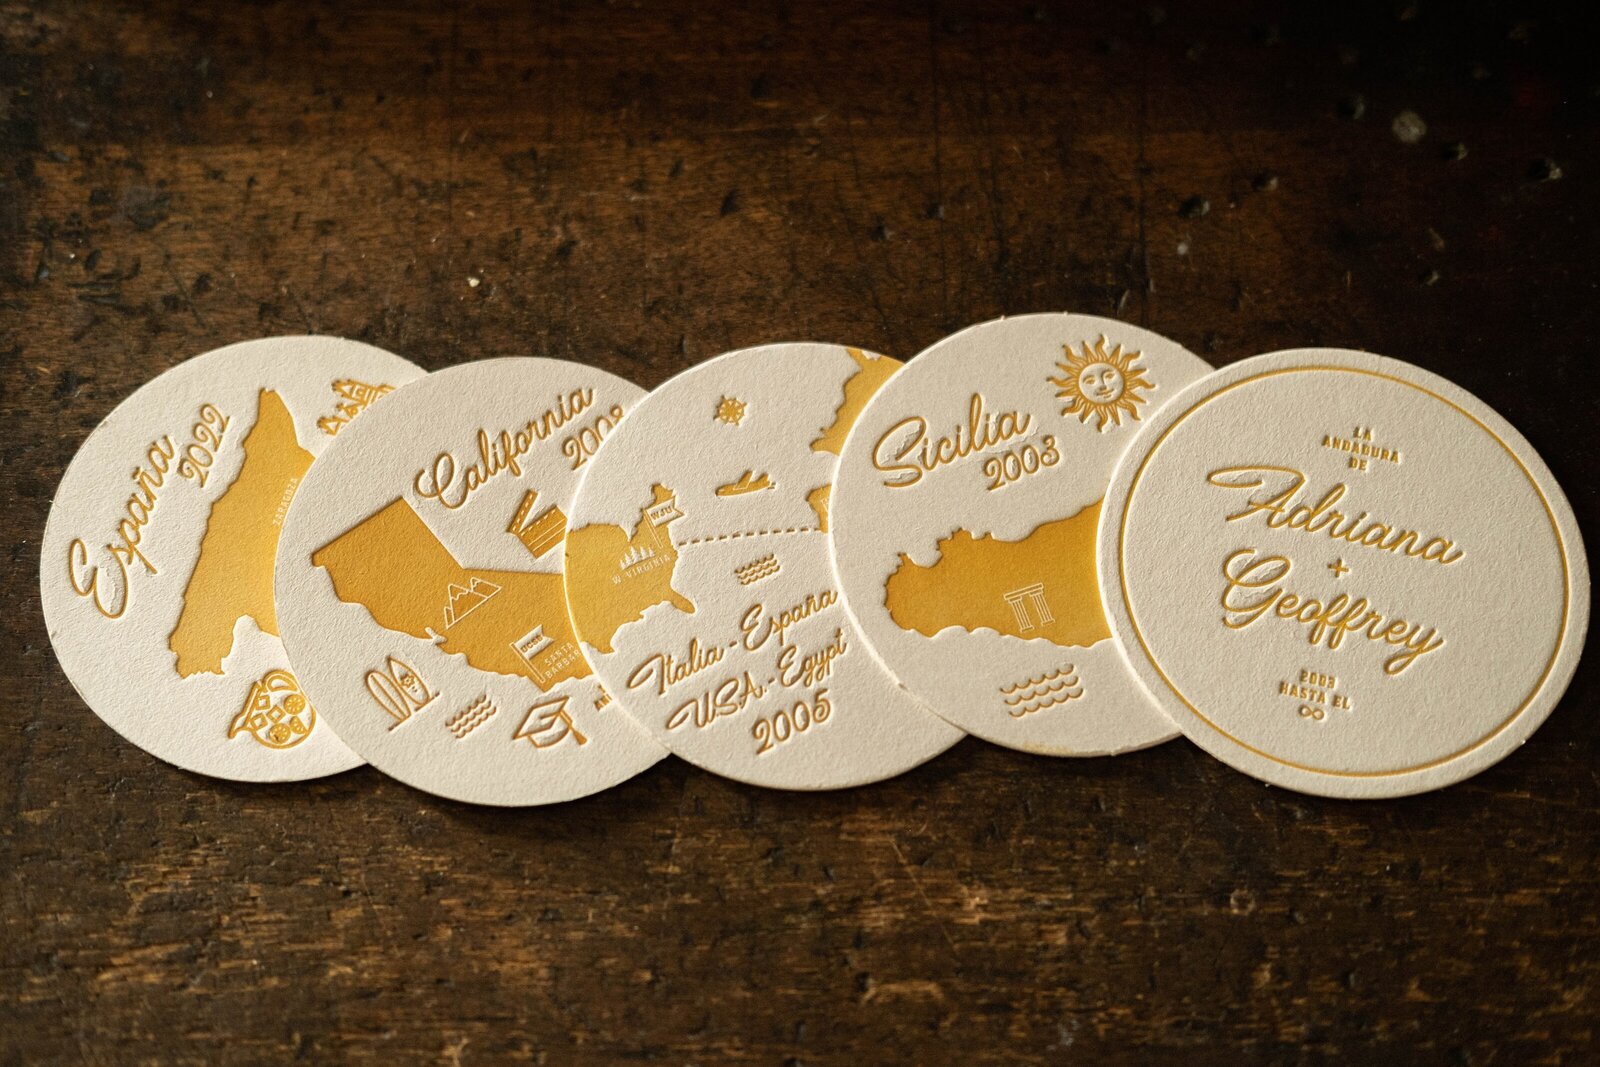 save the date milestone coaster set letterpress printed in golden yellow for a wedding in Spain